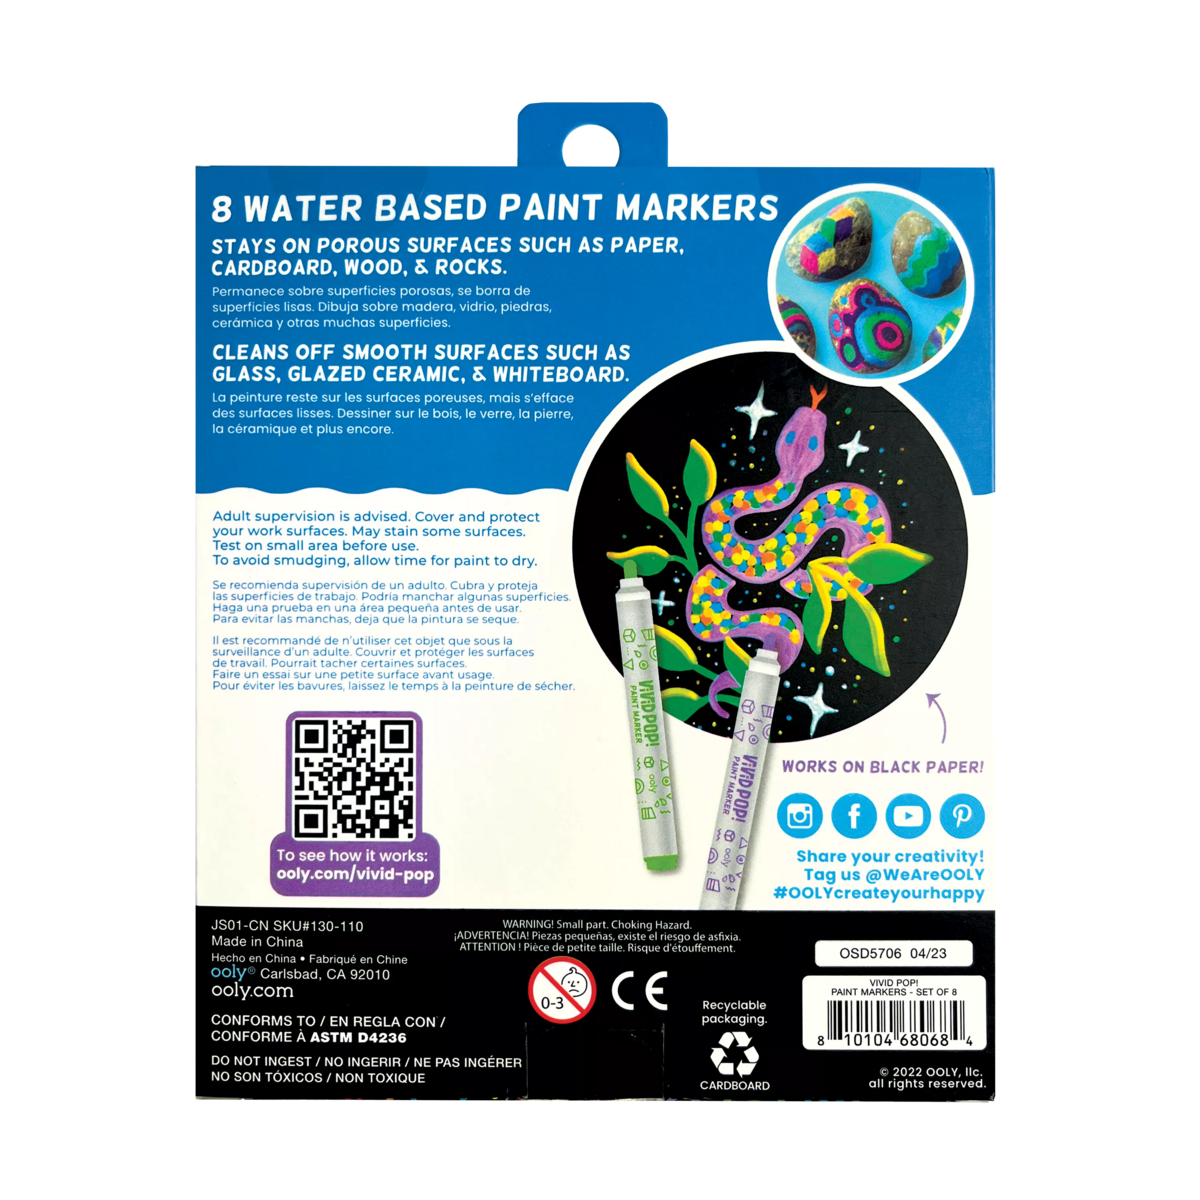 Paint Water / Not Paint Water Set